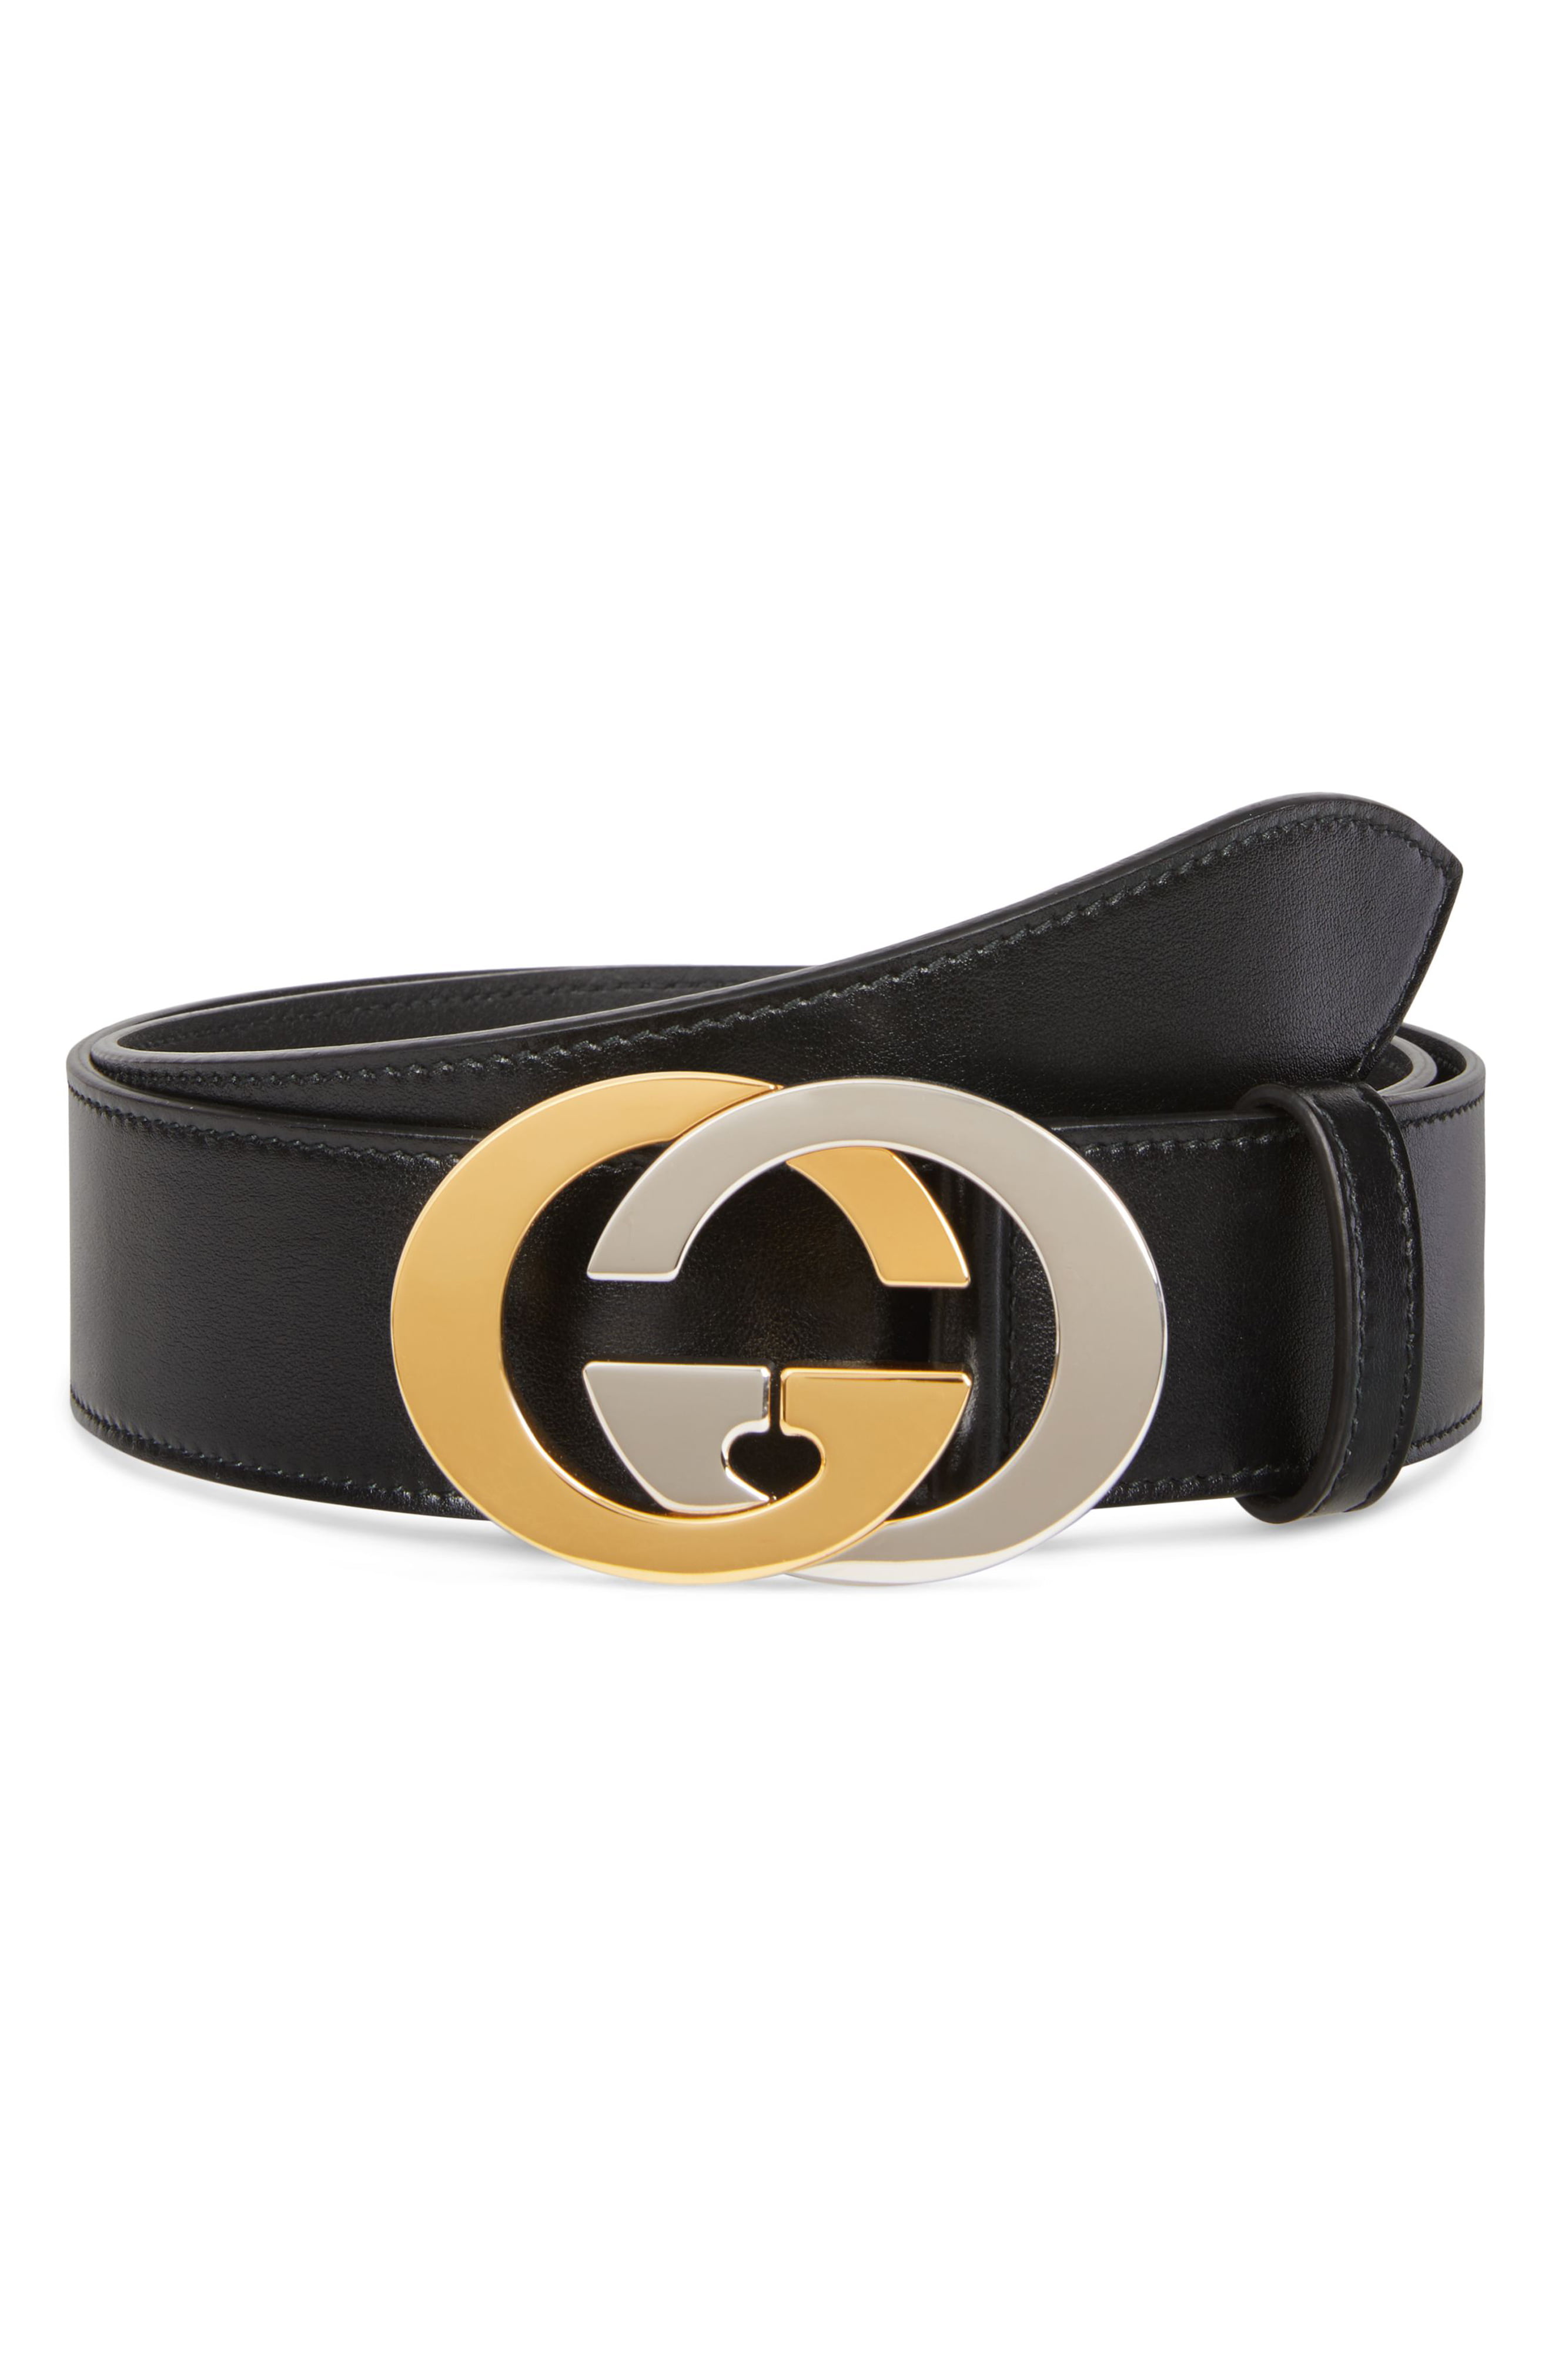 Gucci Belt Buckle Only | Paul Smith